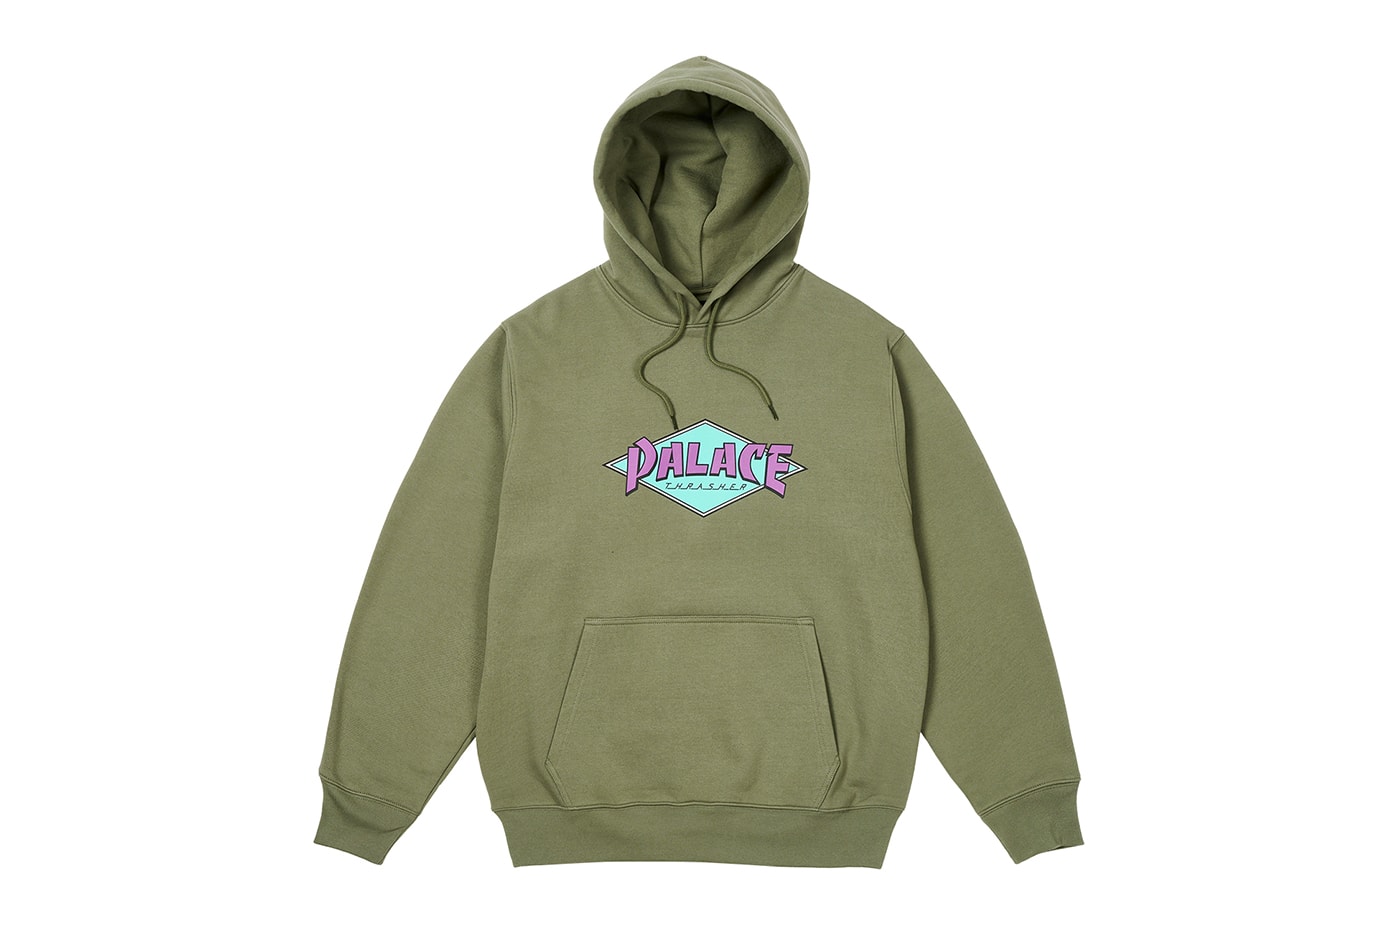 Palace Skateboards Spring Drop 4 Thrasher Collab | Hypebeast